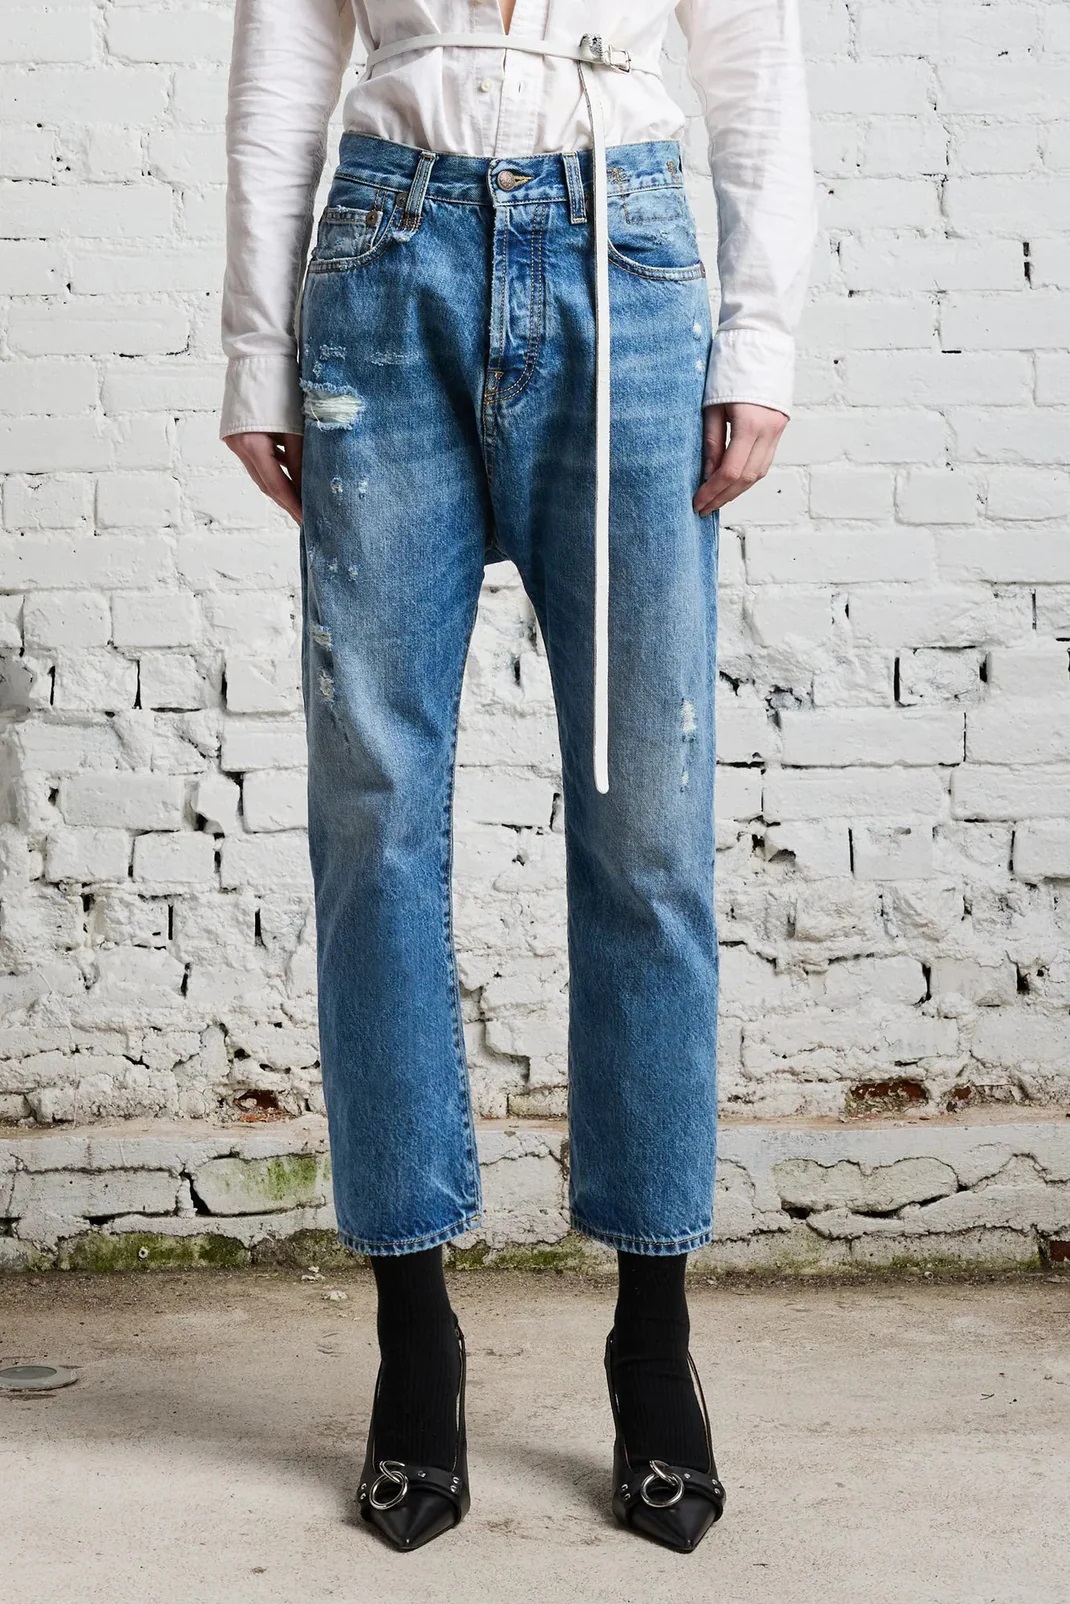 R13 Tailored Drop Jeans in Bain Washing 27